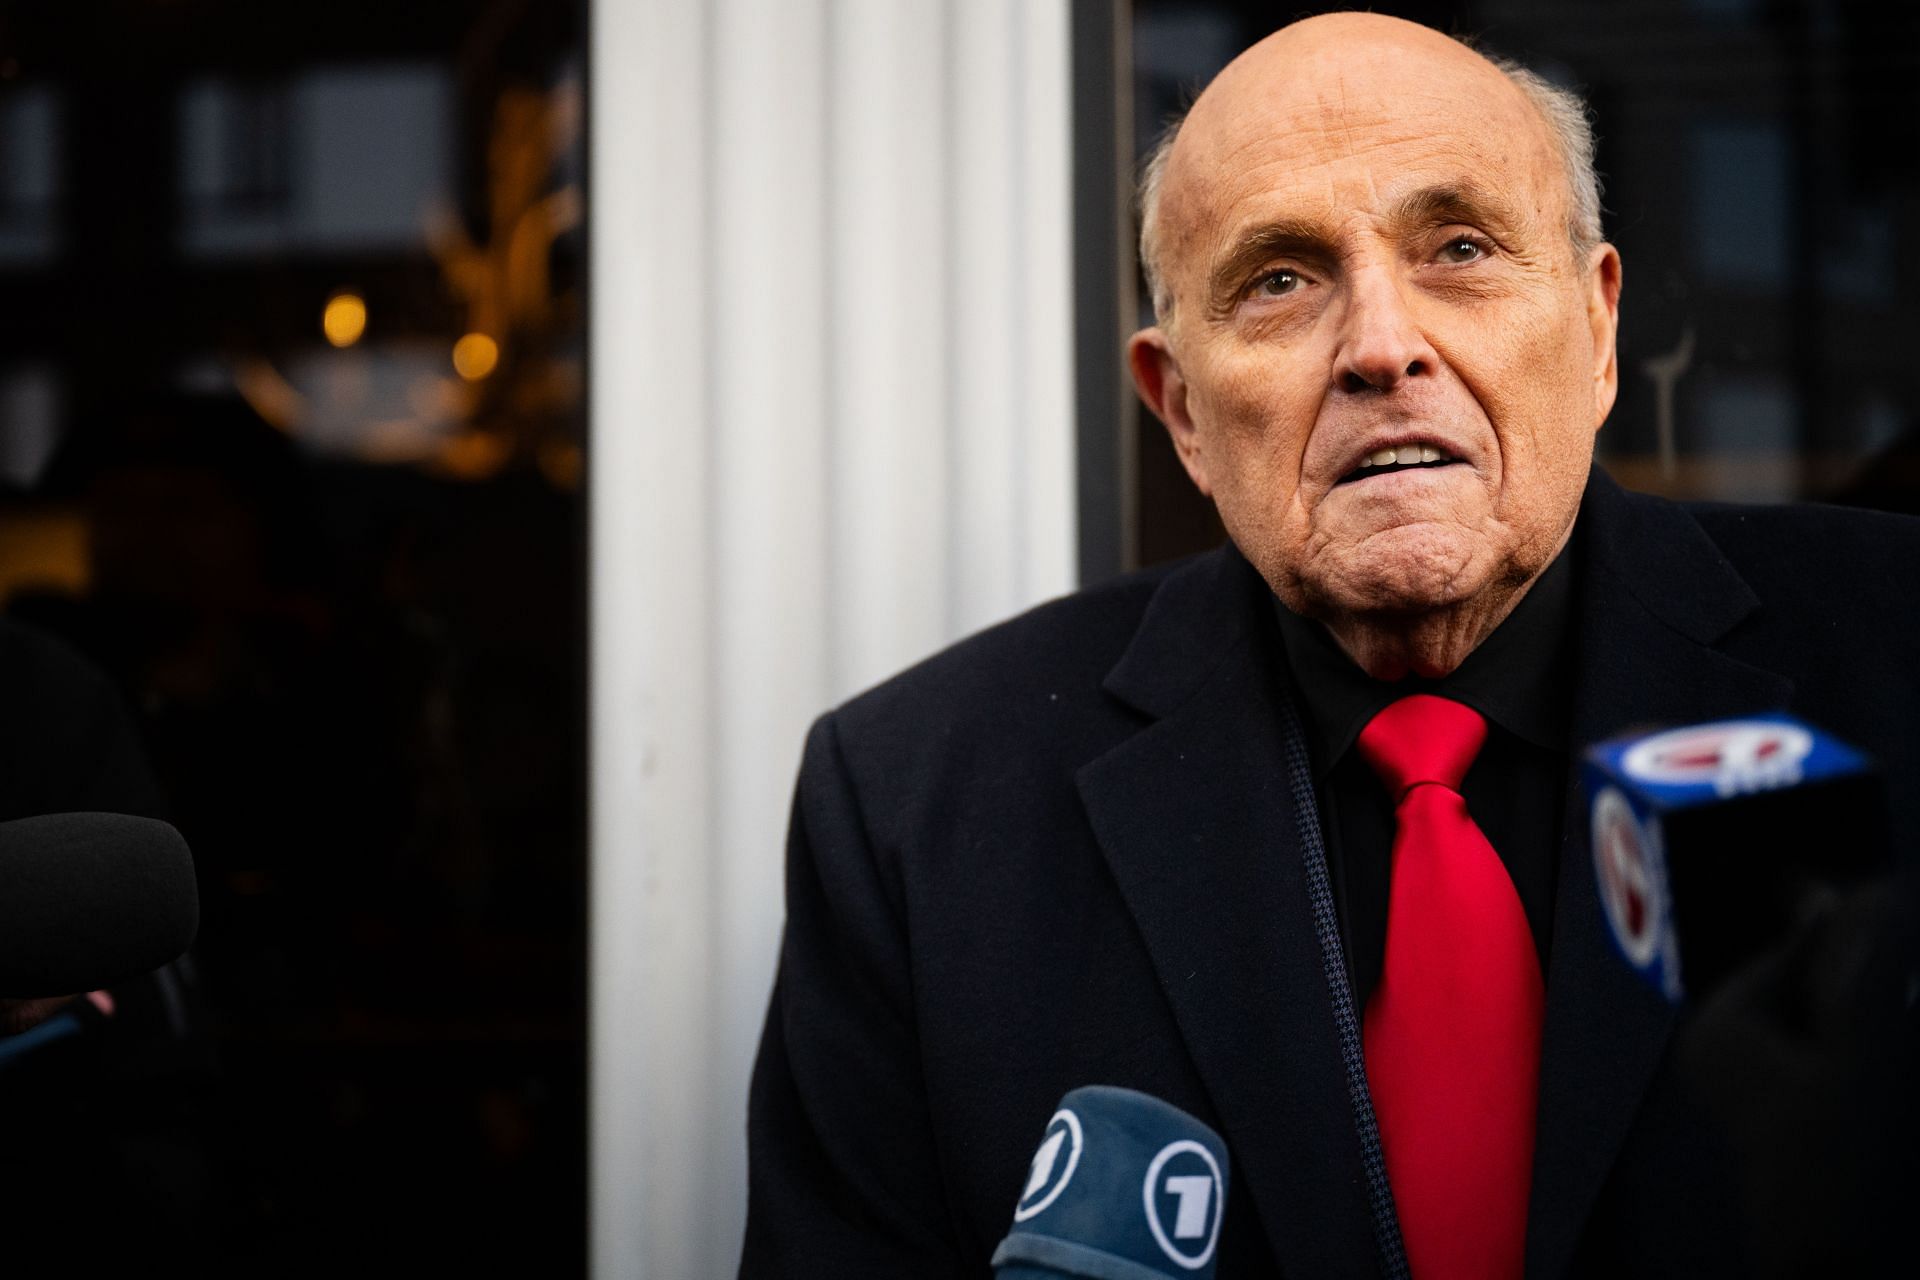 Rudy Giuliani has recently filed for bankruptcy following a defamation lawsuit for $148 million.